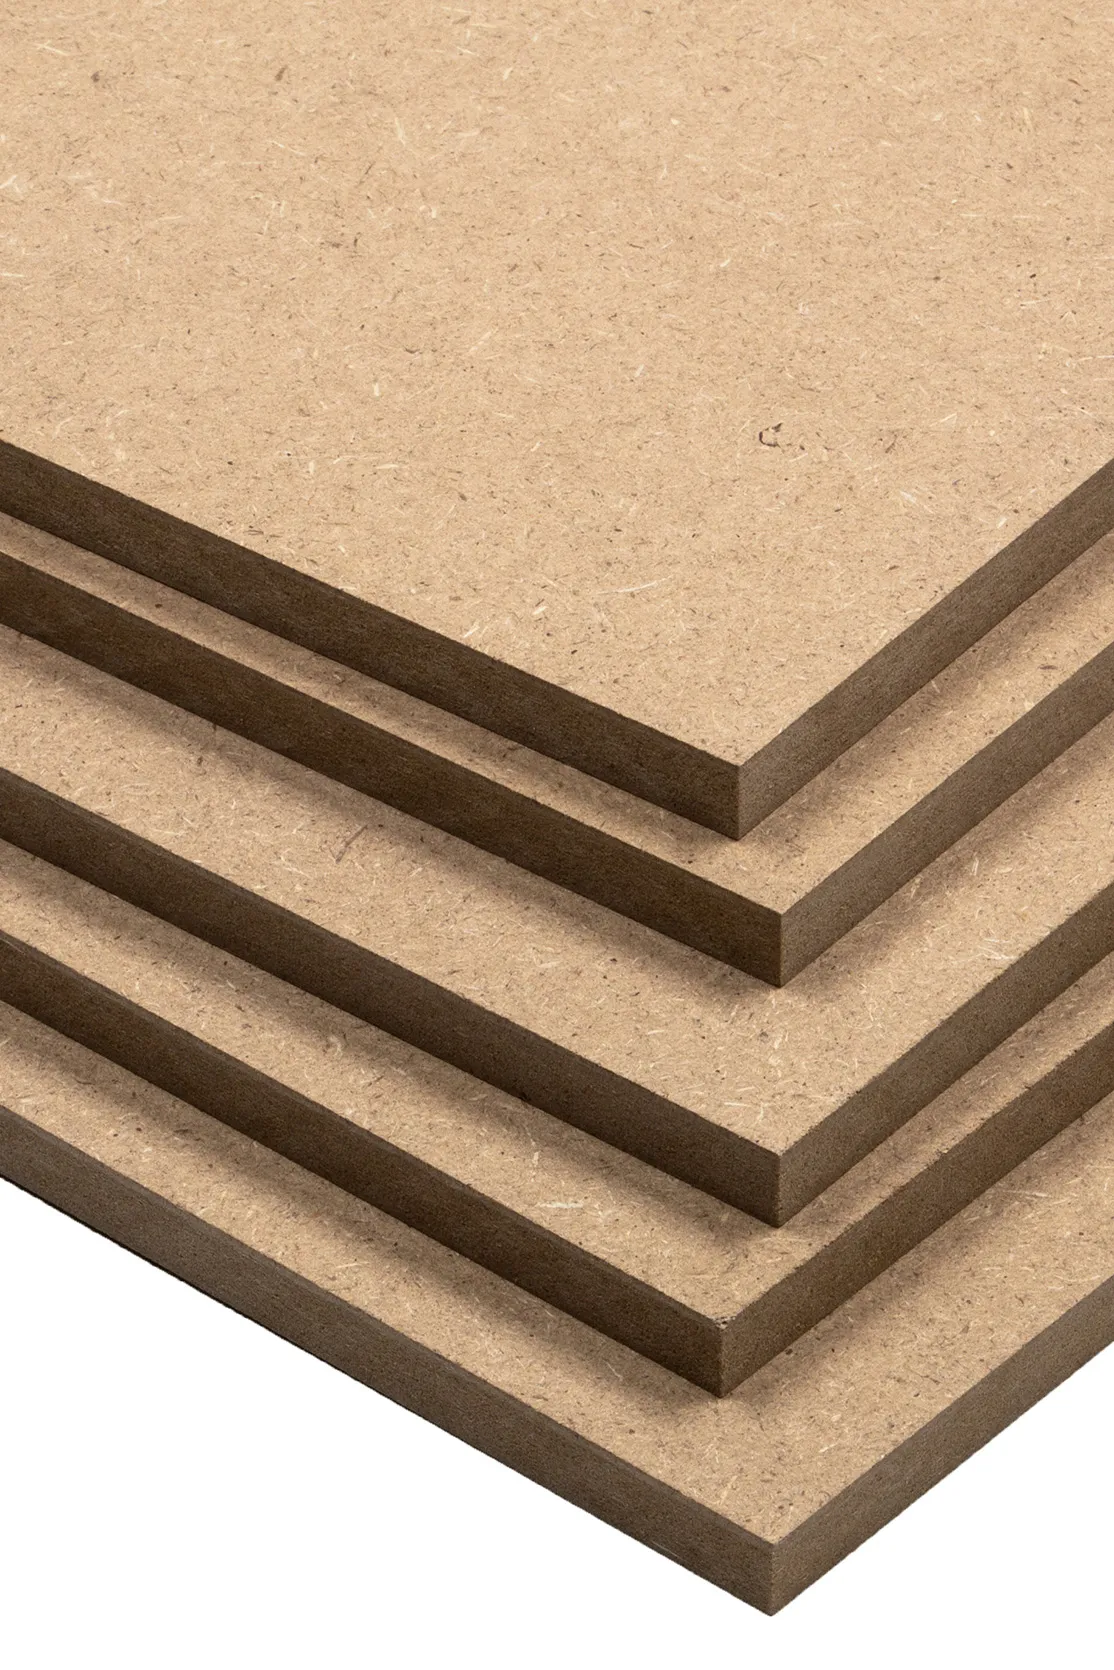 Multiple boards of raw mdf lined up